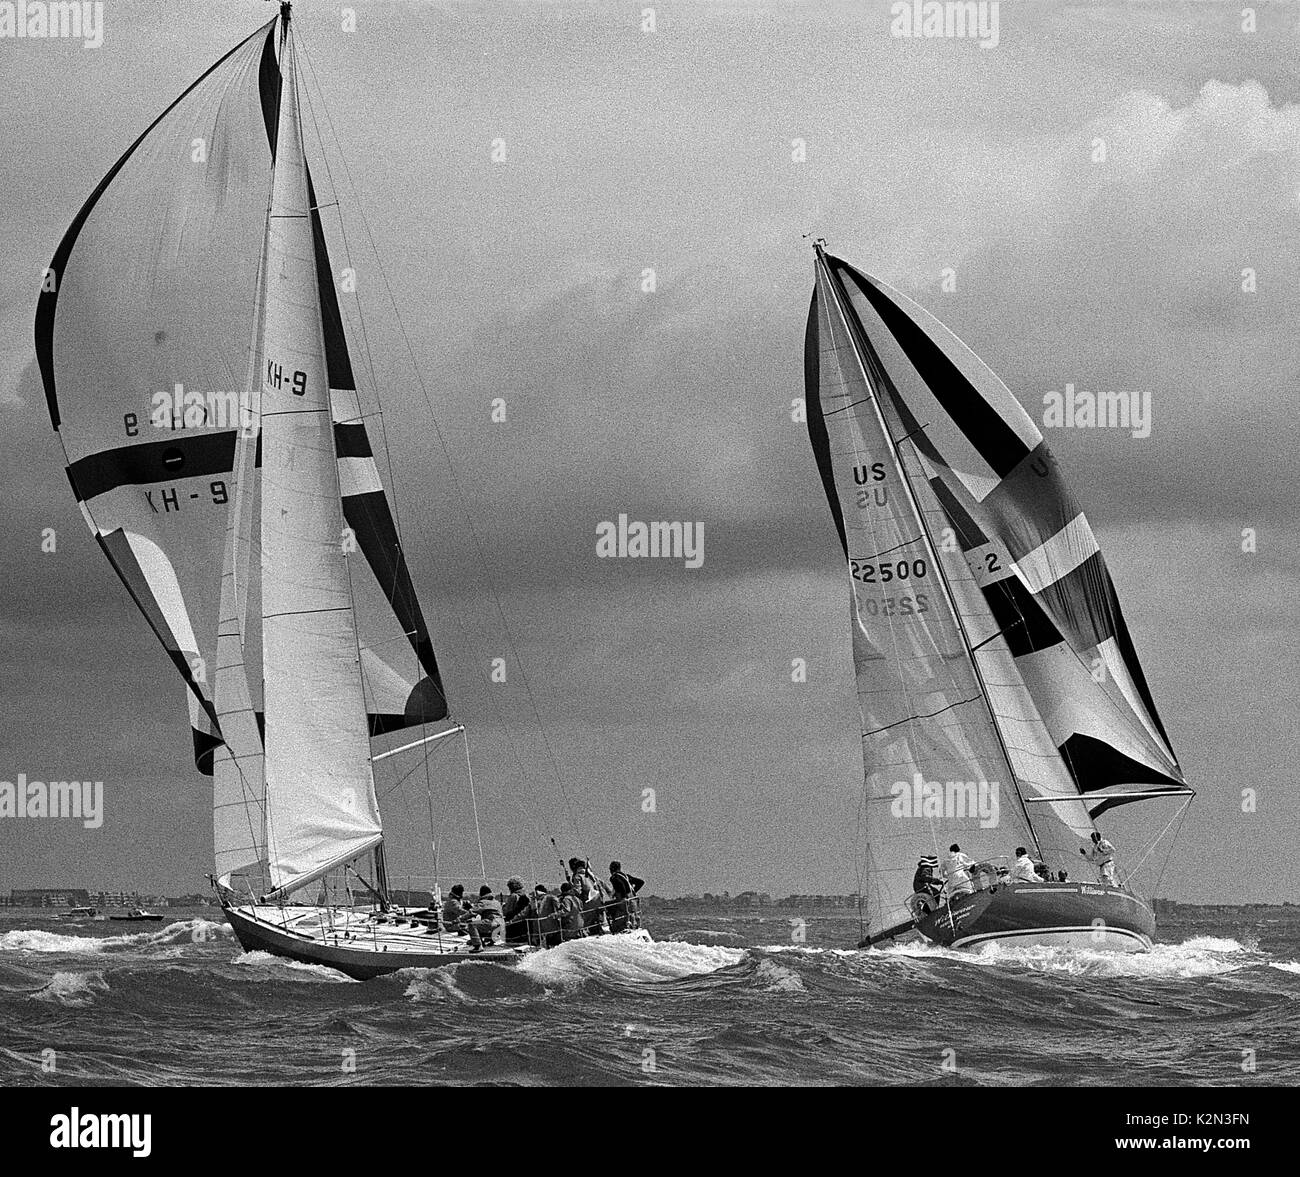 AJAXNETPHOTO. 1979. SOLENT, ENGLAND. - ADMIRAL'S CUP SOLENT INSHORE RACE - UIN-NA-MARA (SIN) AND WILLIWAW (USA) IN GUSTY CONDITIONS. PHOTO:JONATHAN EASTLAND/AJAX REF:79 2009 Stock Photo